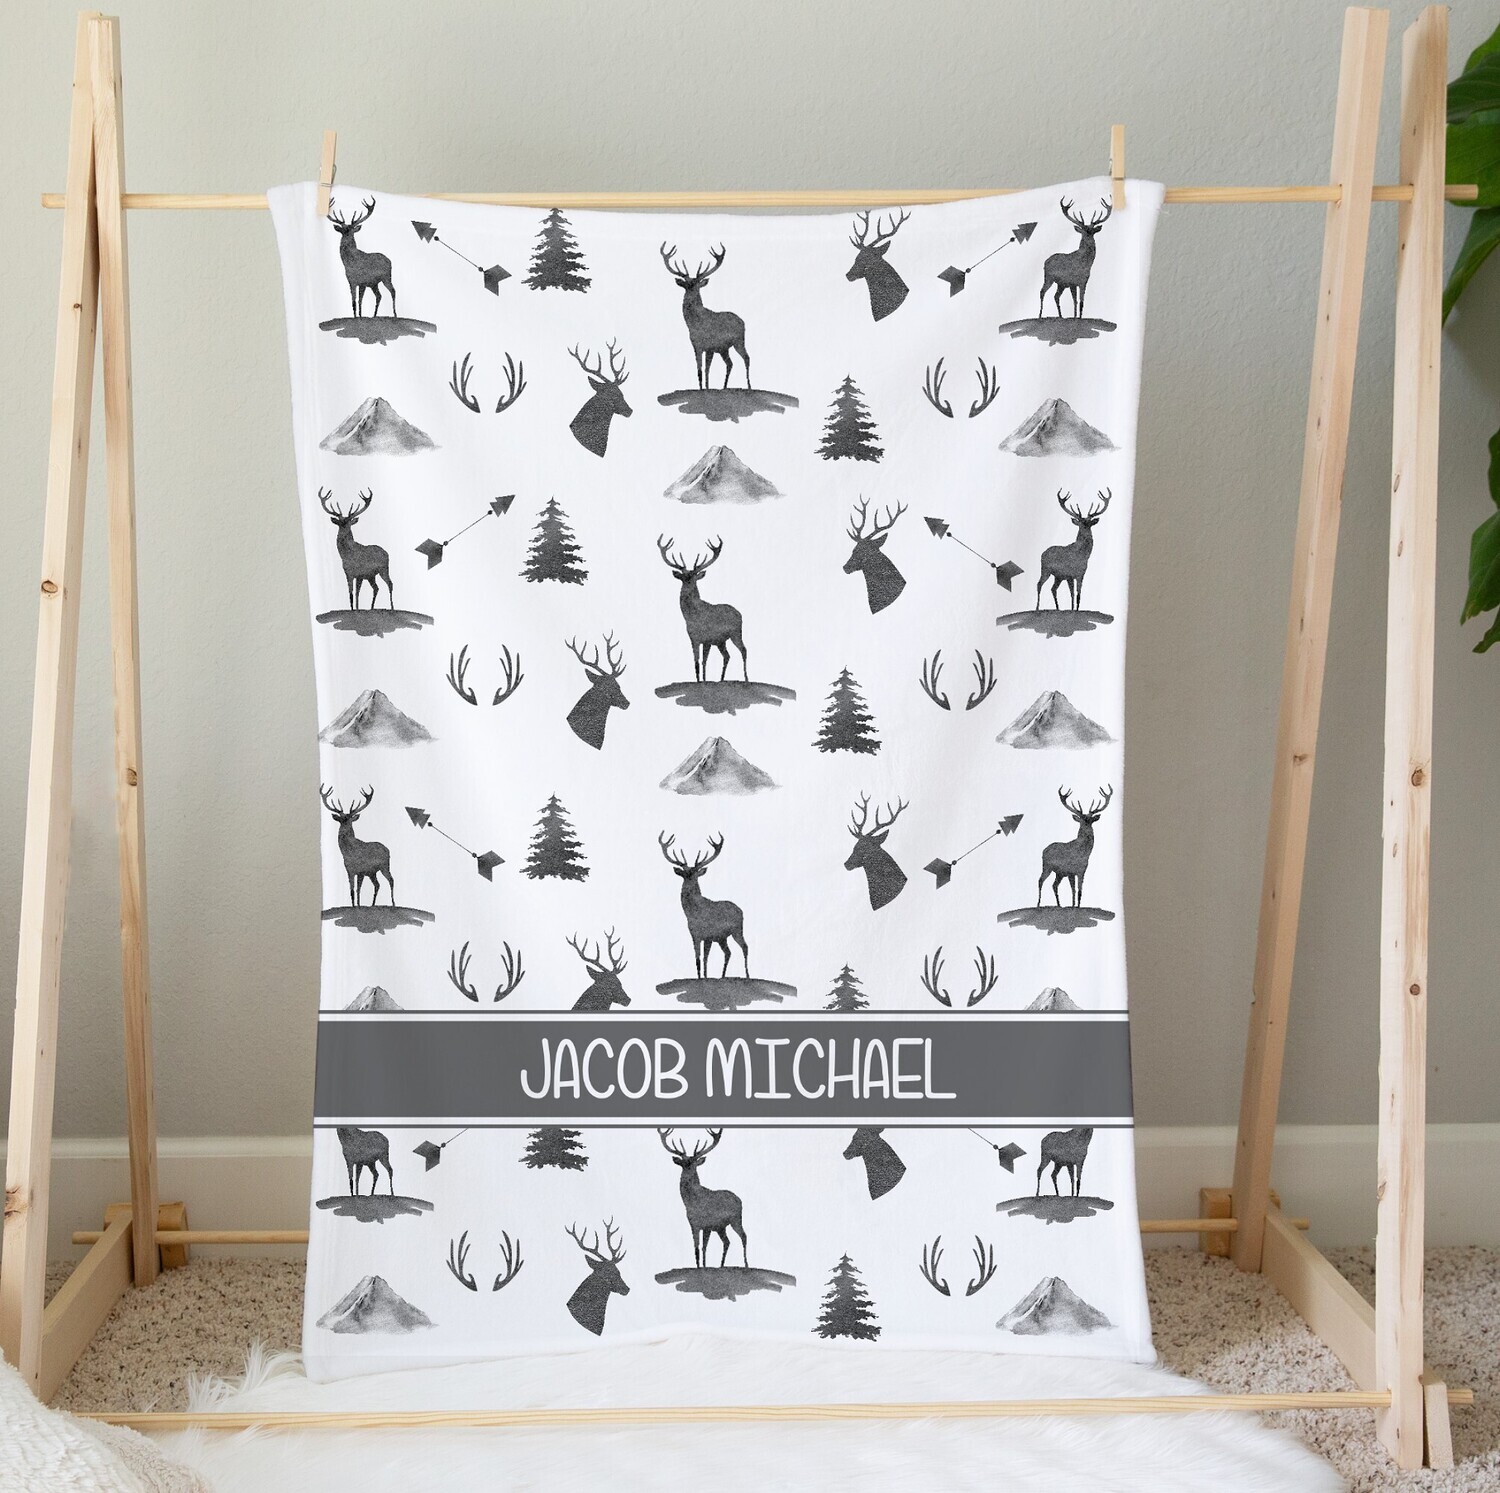 Personalized Baby Boy Blanket Deer Mountains Blanket Kids Bedroom Tummy Time Baby Shower Gift